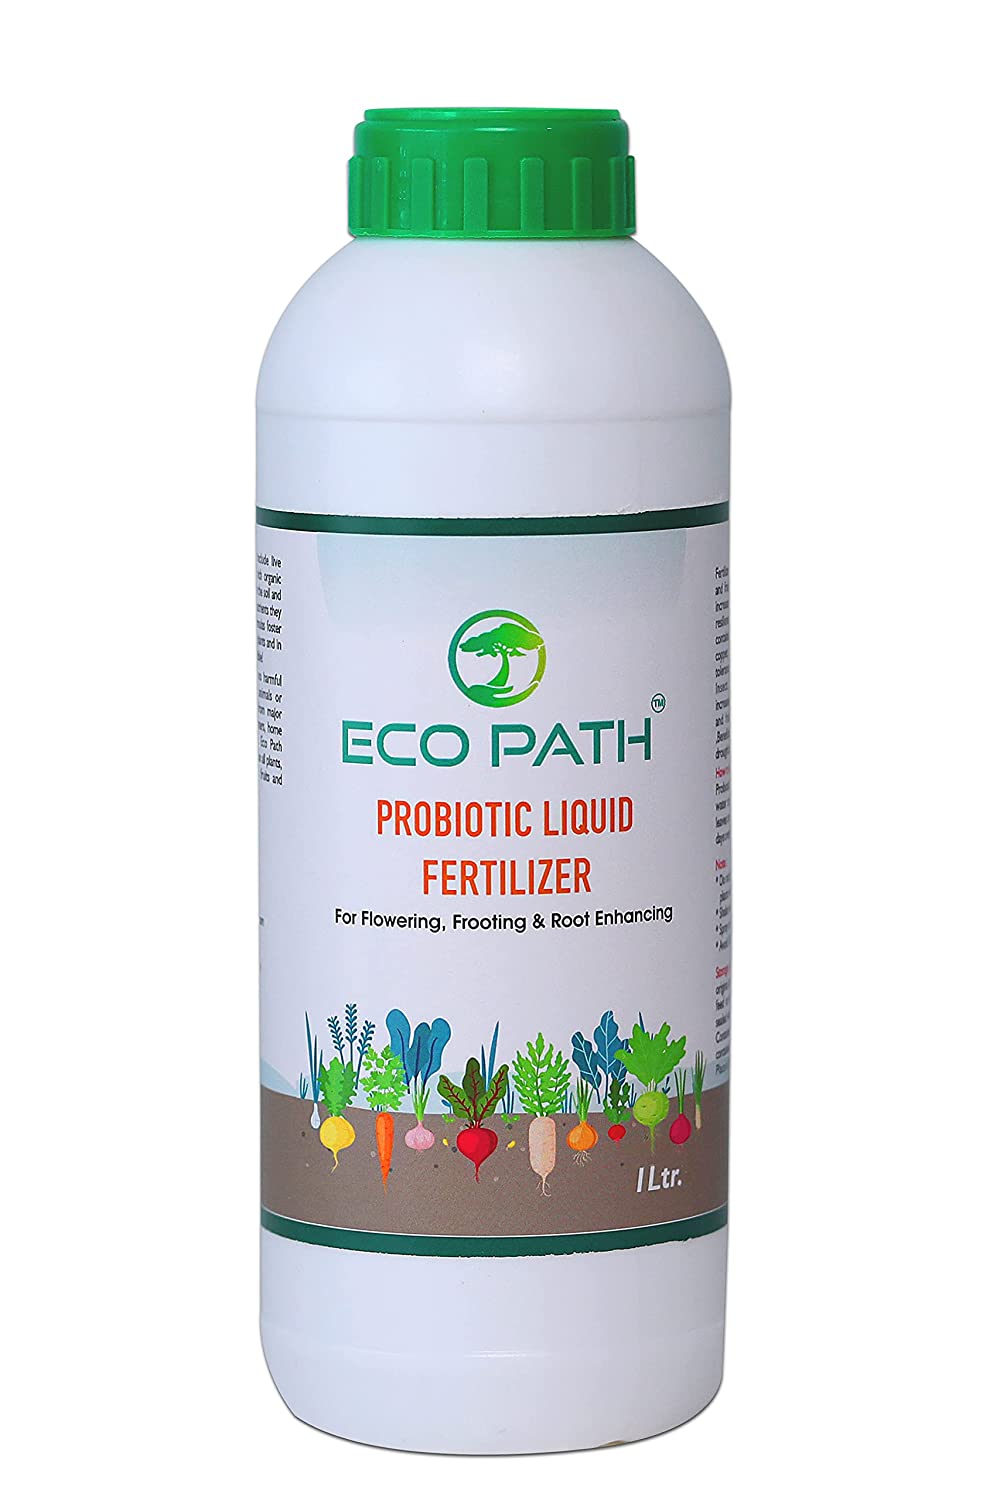 Eco Path - Probiotic Organic Fertilizer for Flowering, Fruiting & Root Enhancing with Measuring cup - hfnl!fe